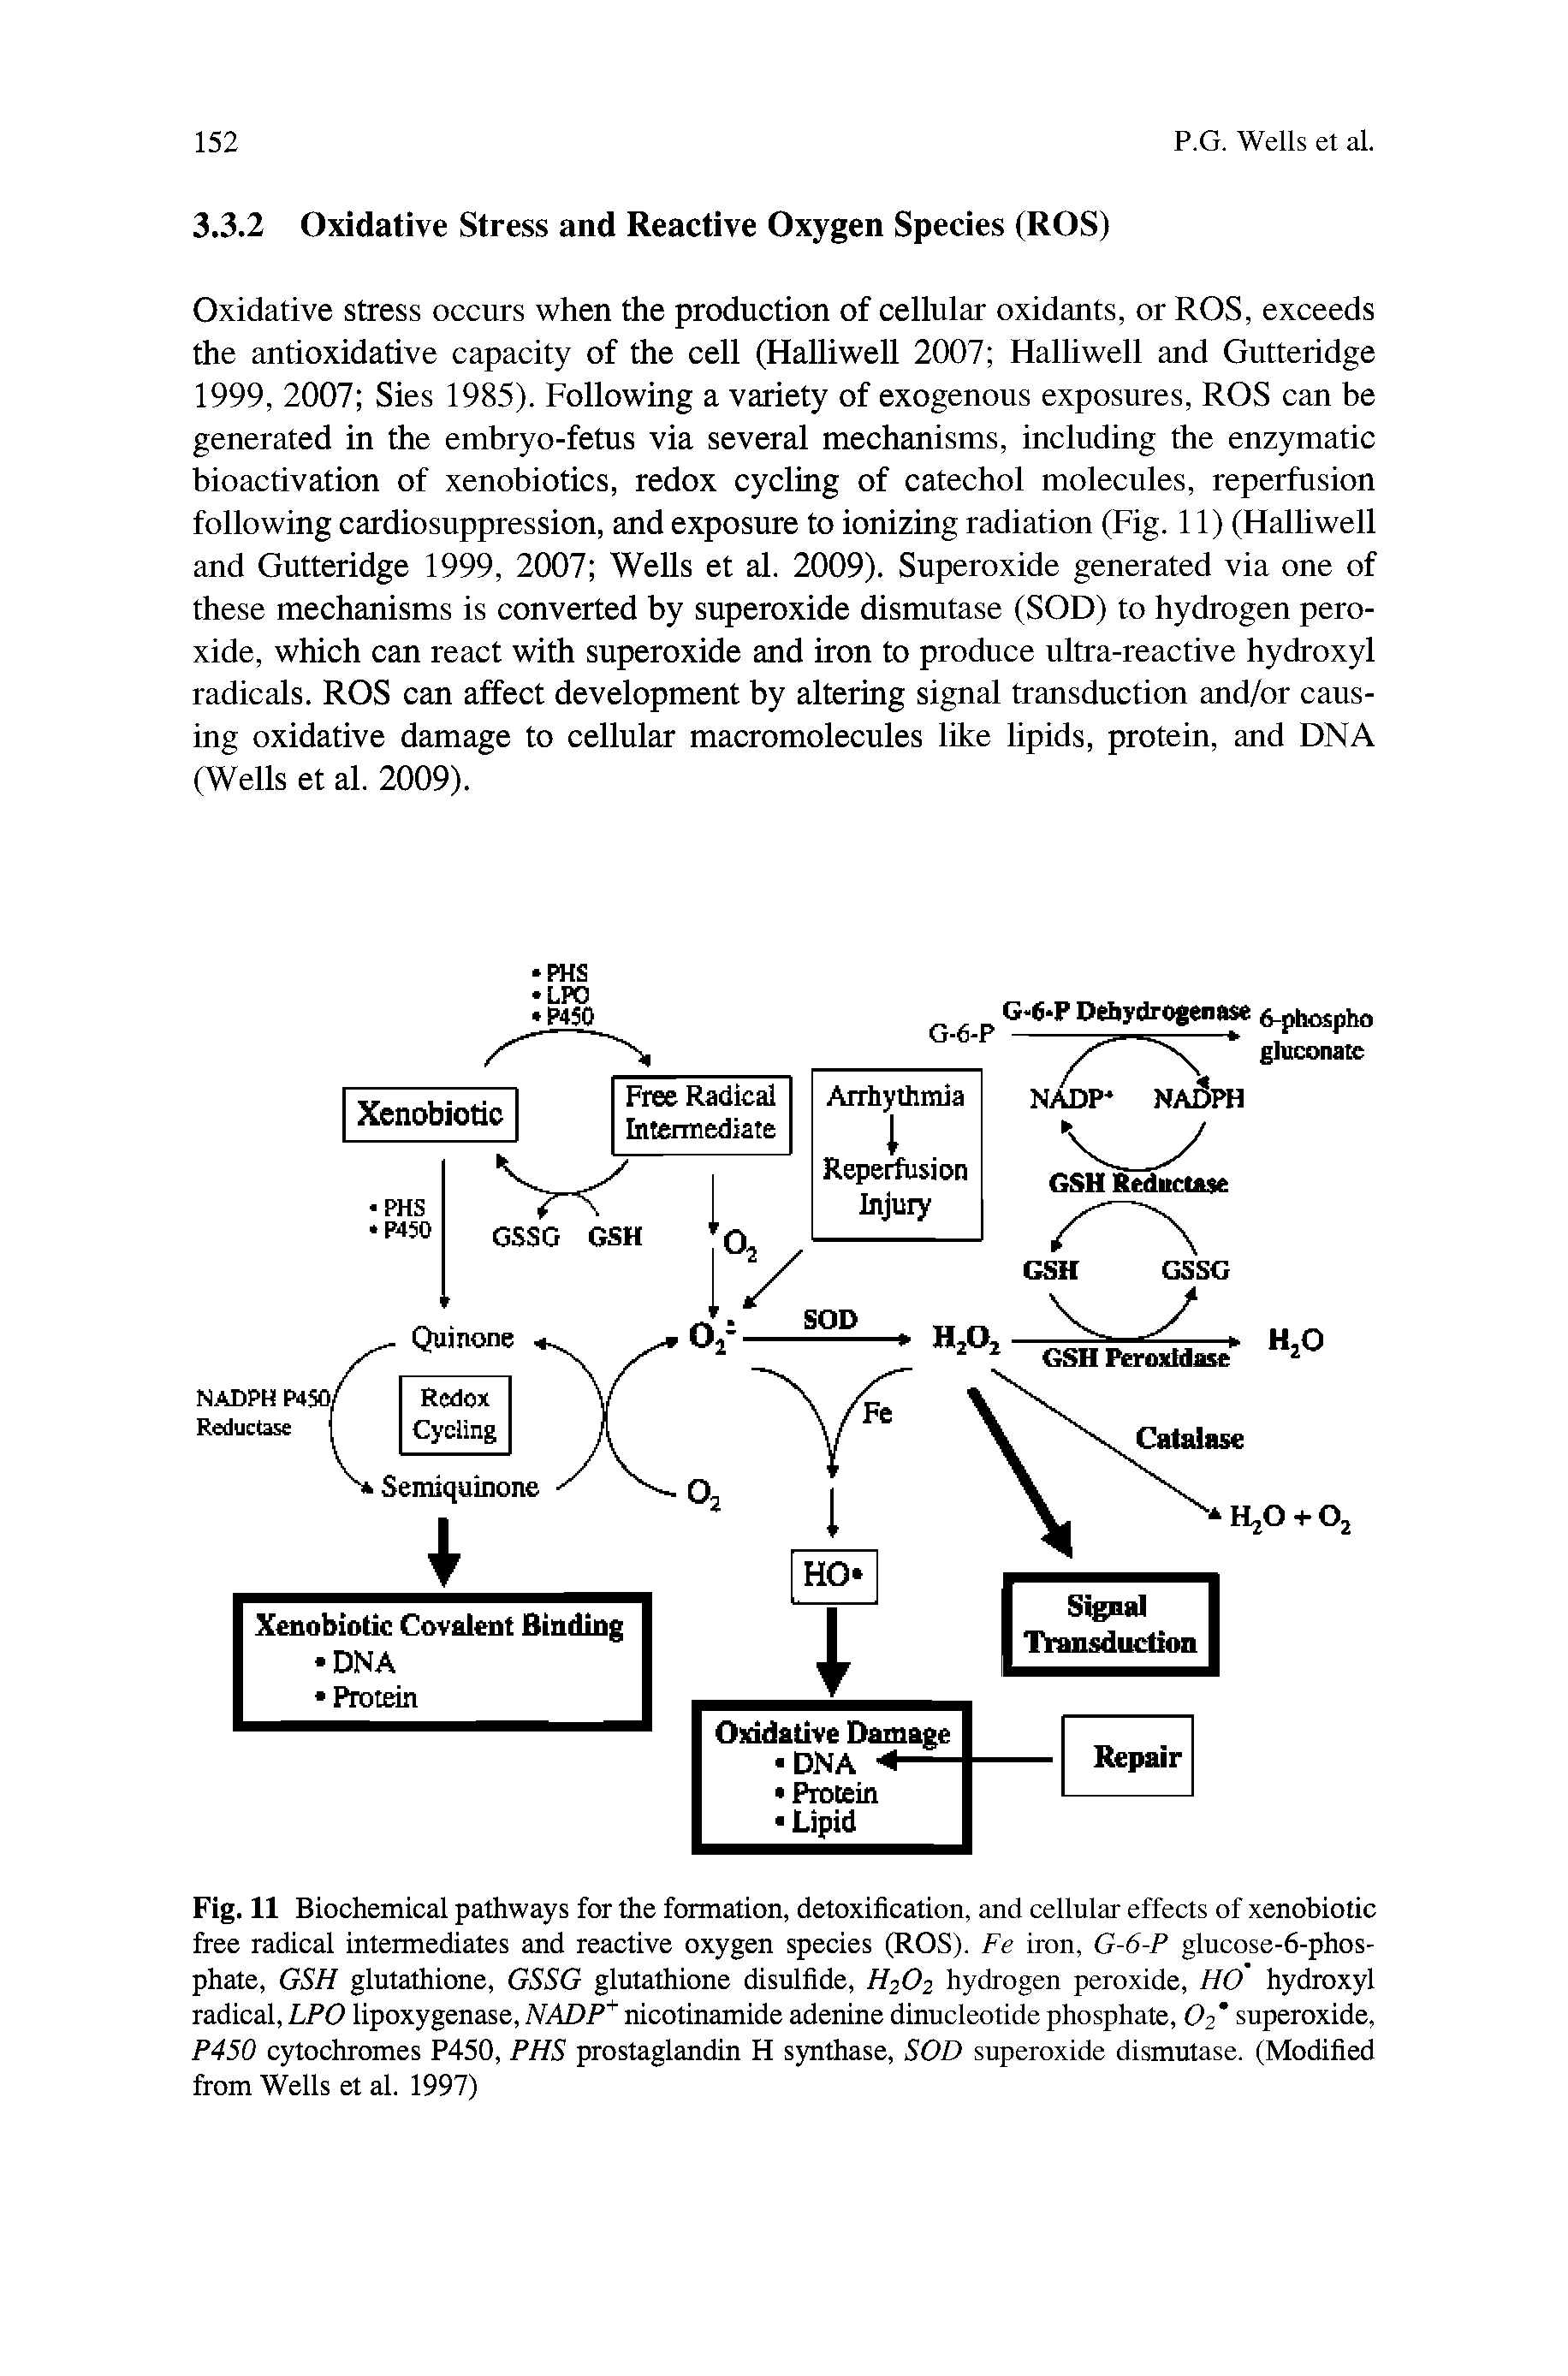 Fig. 11 Biochemical pathways for the formation, detoxification, and cellular effects of xenobiotic free radical intermediates and reactive oxygen species (ROS). Fe iron, G-6-P glucose-6-phos-phate, GSH glutathione, GSSG glutathione disulfide, H2O2 hydrogen peroxide, FIO hydroxyl radical, LPO lipoxygenase, NADP nicotinamide adenine dinucleotide phosphate, O2 superoxide, P450 cytochromes P450, PHS prostaglandin H synthase, SOD superoxide dismutase. (Modified from Wells et al. 1997)...